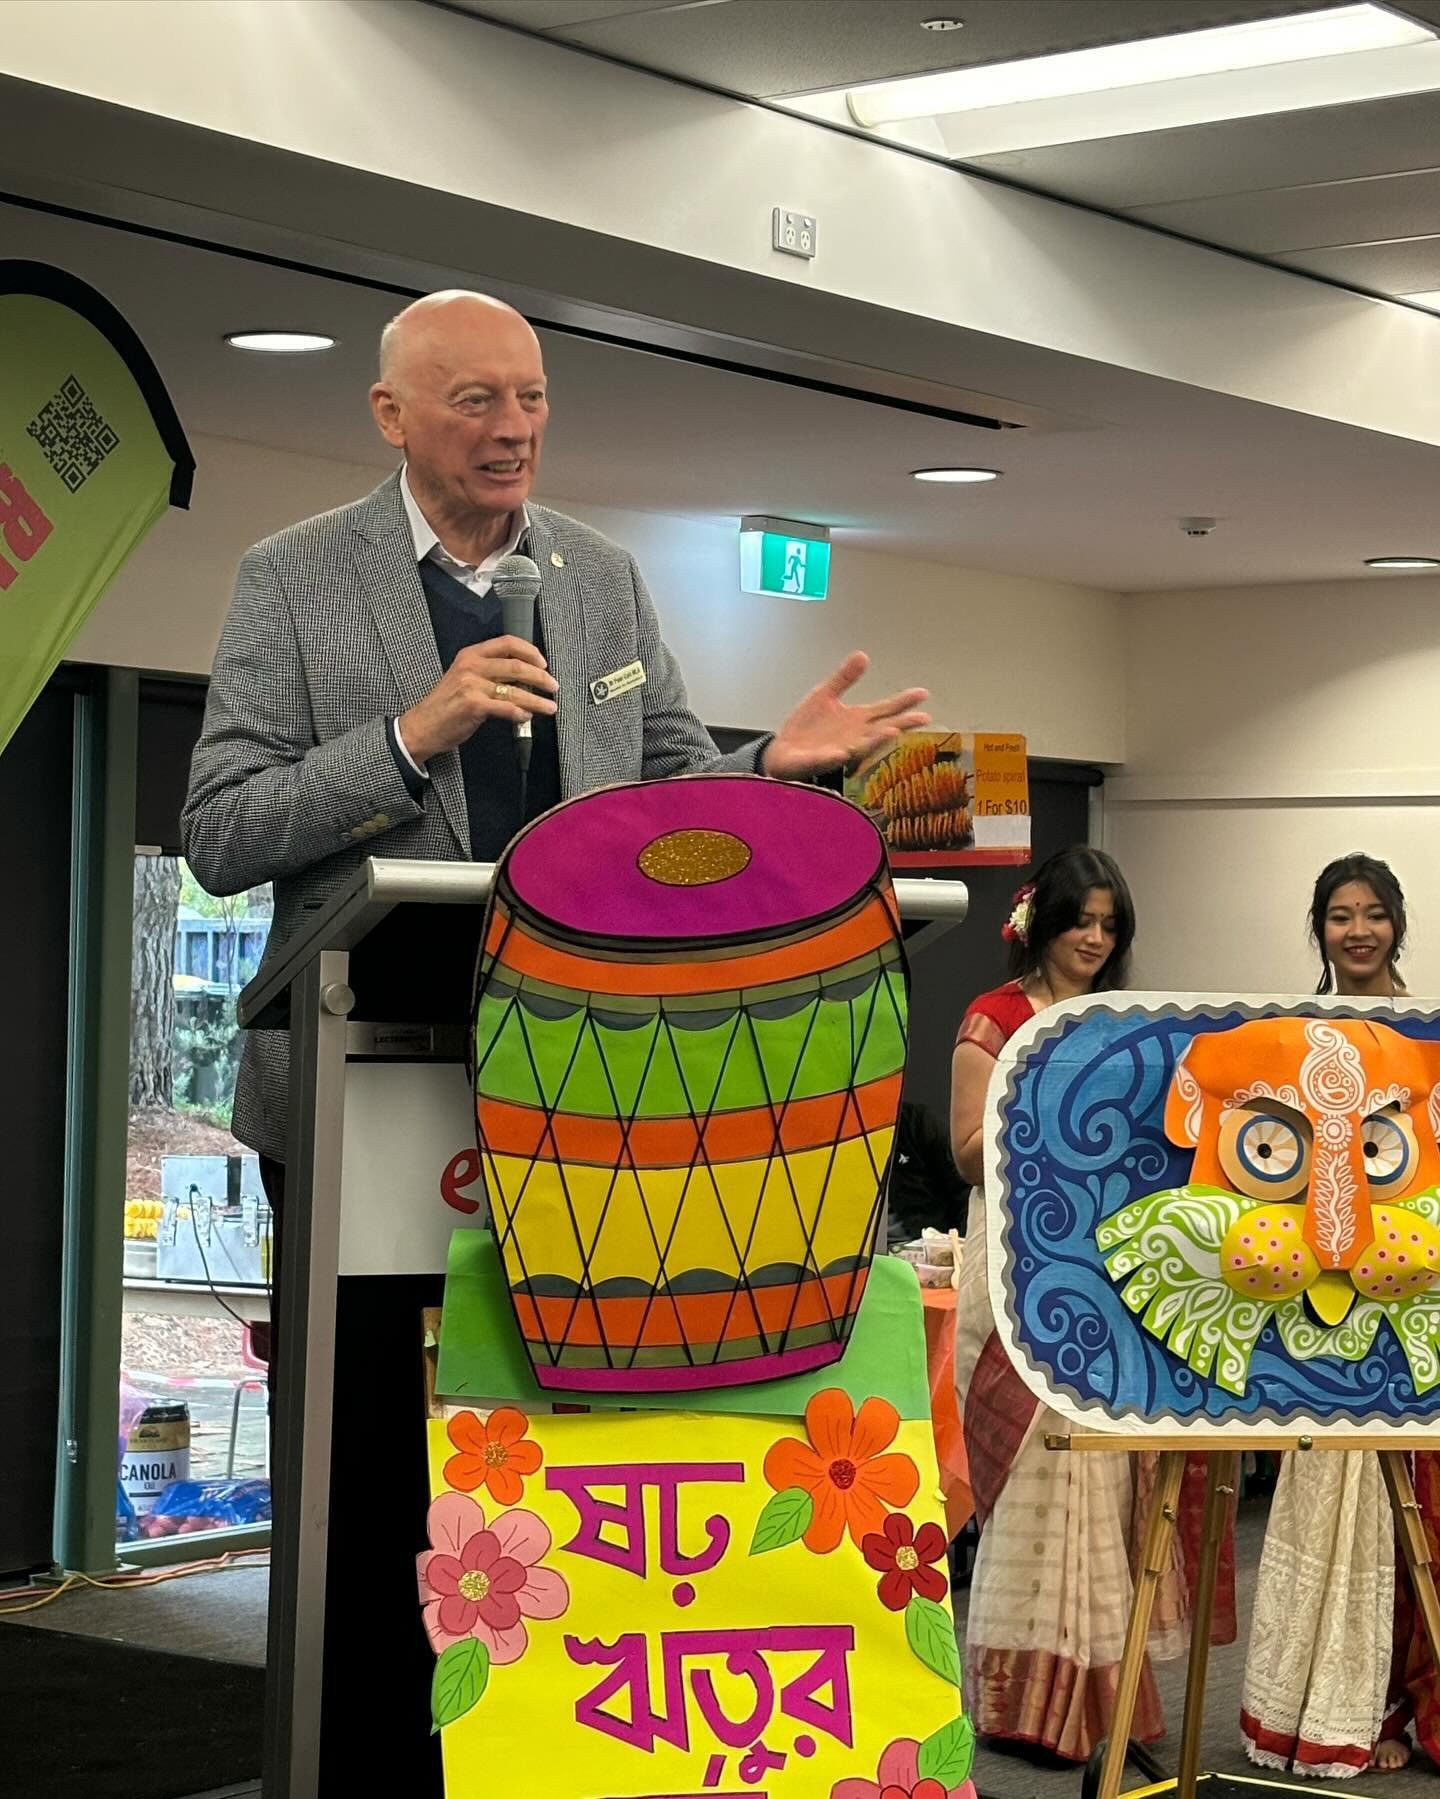 Boishakhi Mela is a vibrant celebration of Bangladesh culture, heritage, and traditions. Last Sunday I joined this celebration at the invitation of the Bangladesh Australia Association Canberra (BAAC), an event supported by the High Commission for th